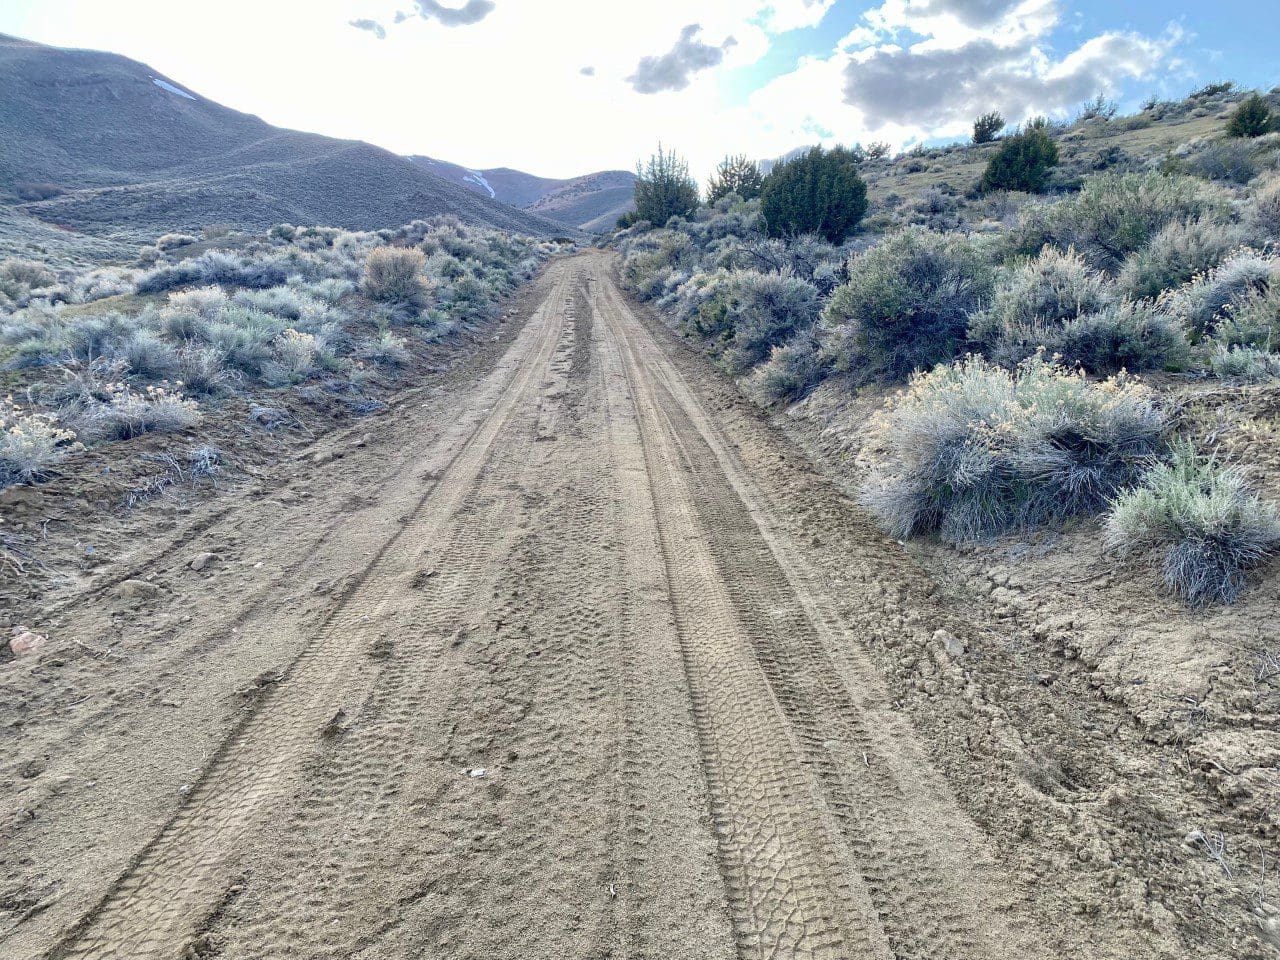 15.84 Acres in GOLD NOTE CANYON, HIDDEN TREASURE #1, SUR 2097 – A PATENTED MINING CLAIM -PAST PRODUCER OF GOLD, SILVER & ZINC photo 35